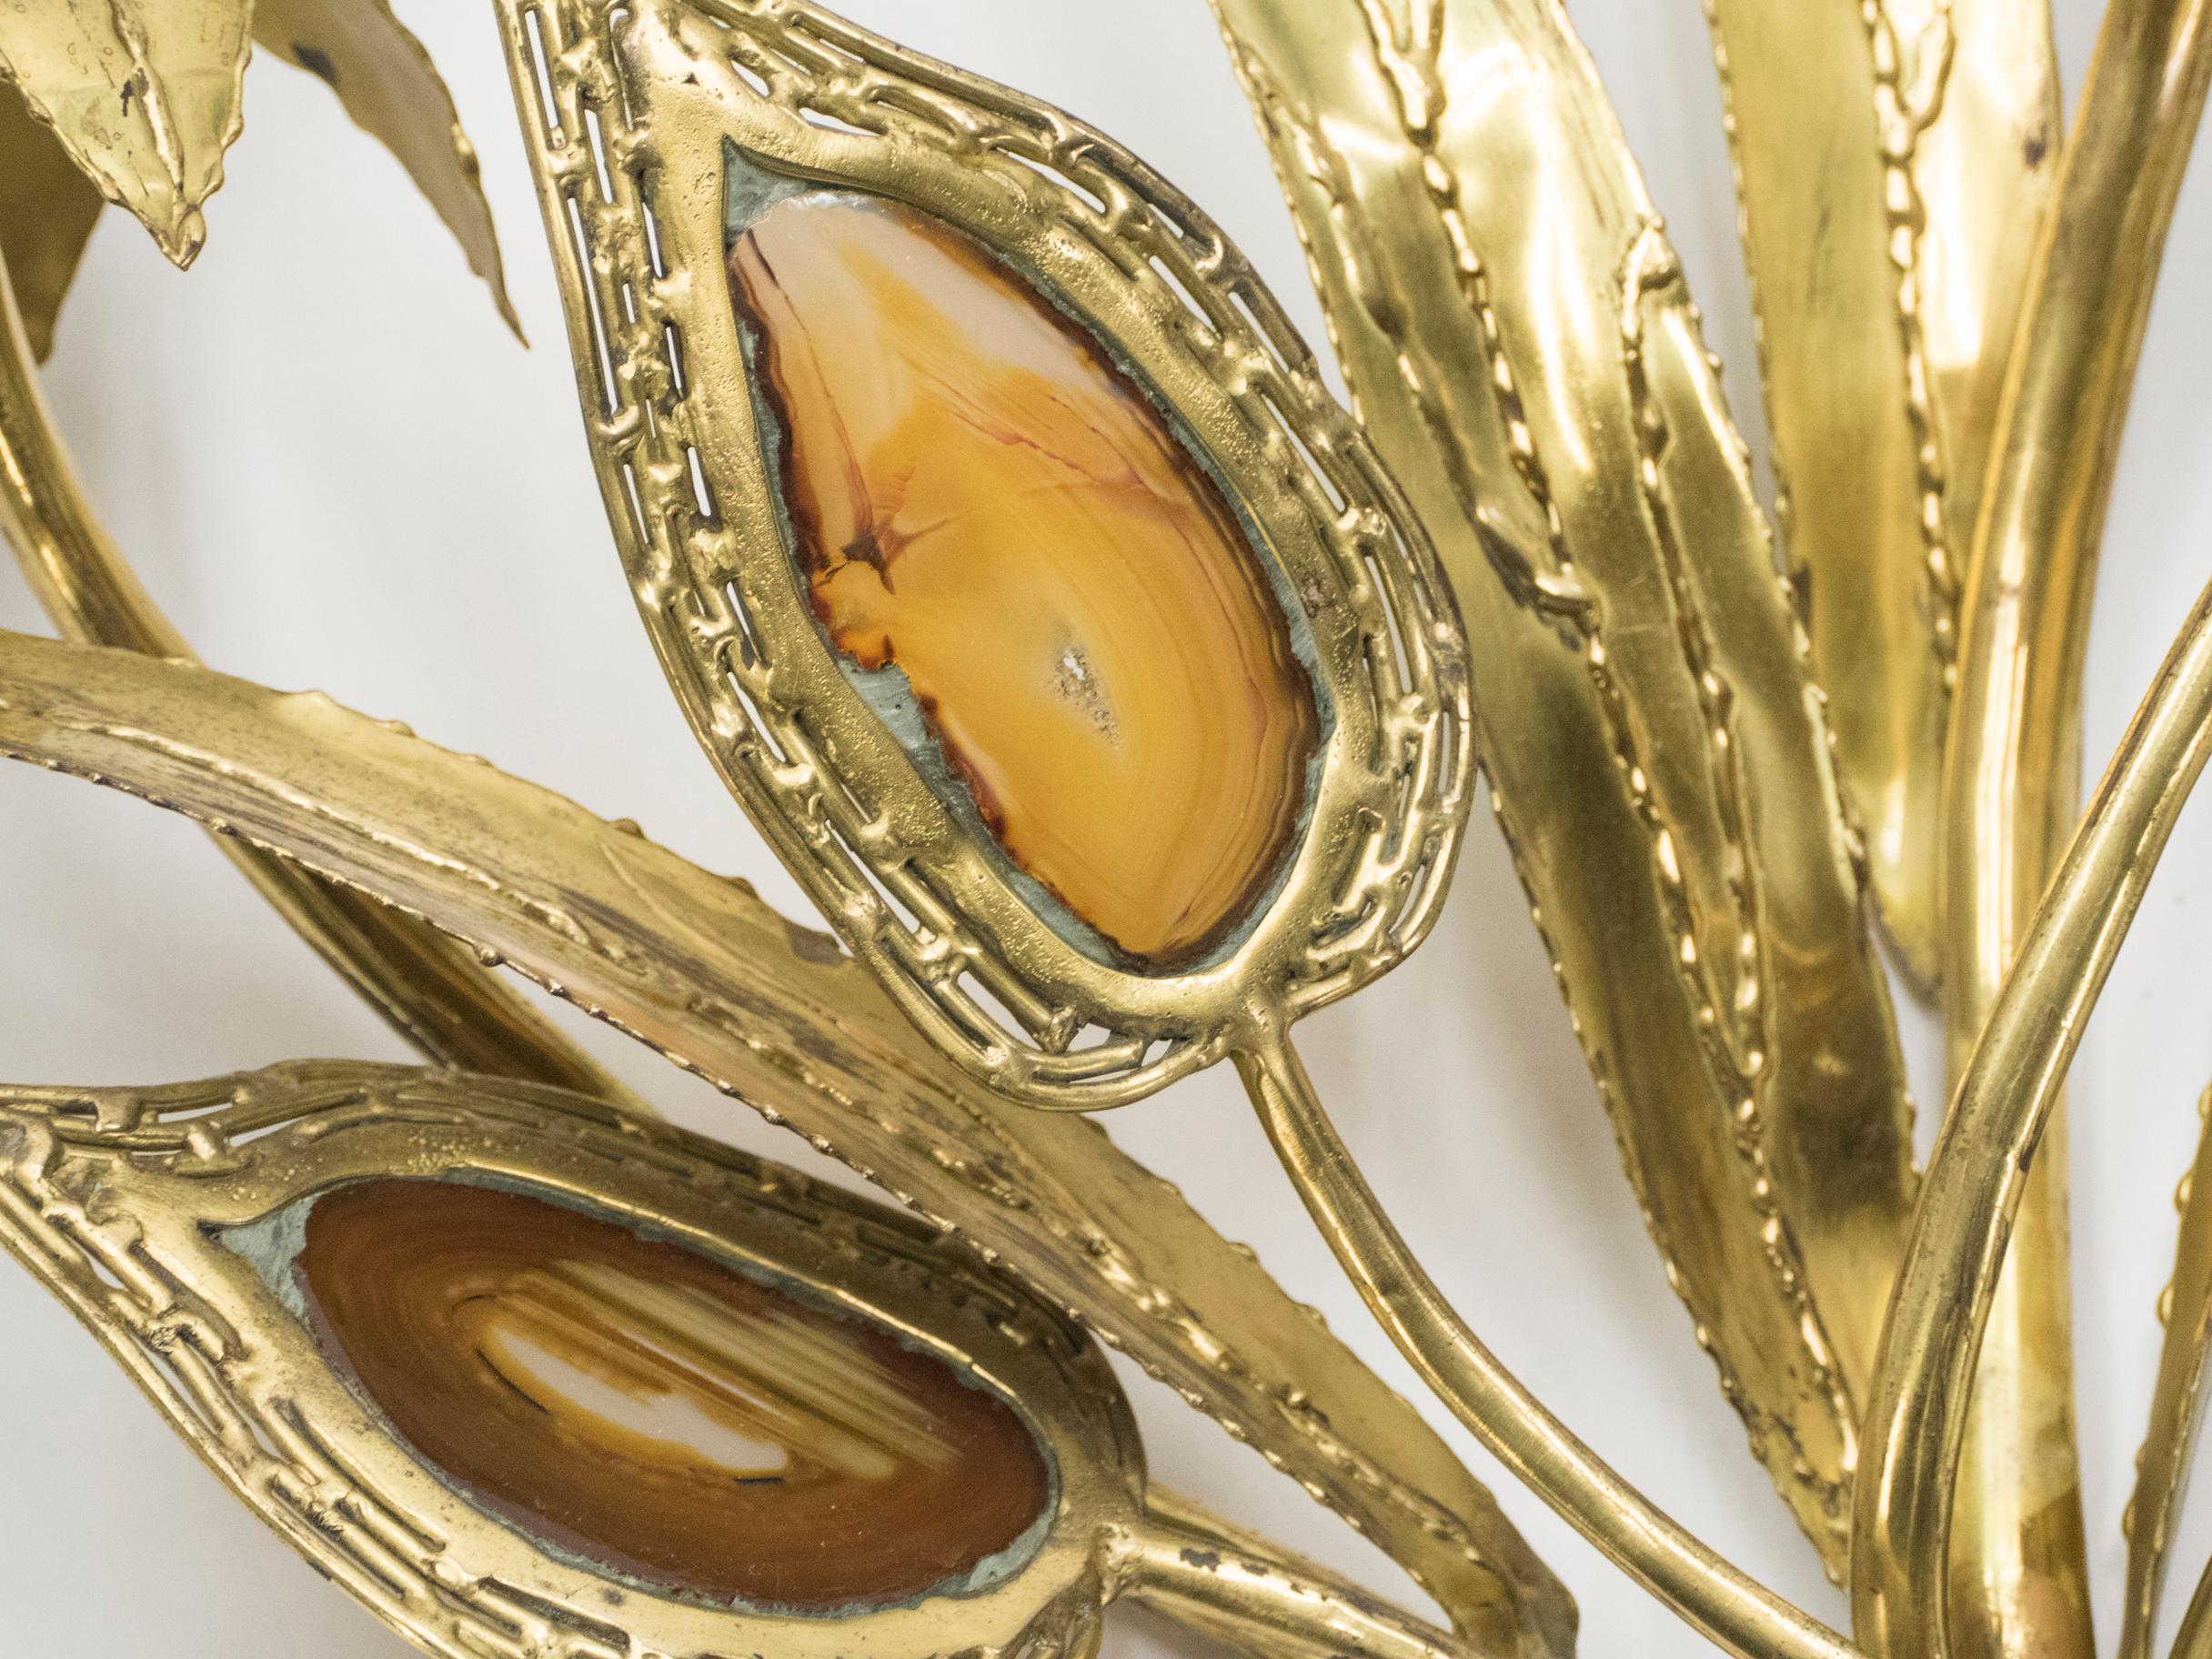 Large Pair of Signed J. Duval Brasseur Foliated Brass and Agate Wall-Lights 1970 For Sale 2